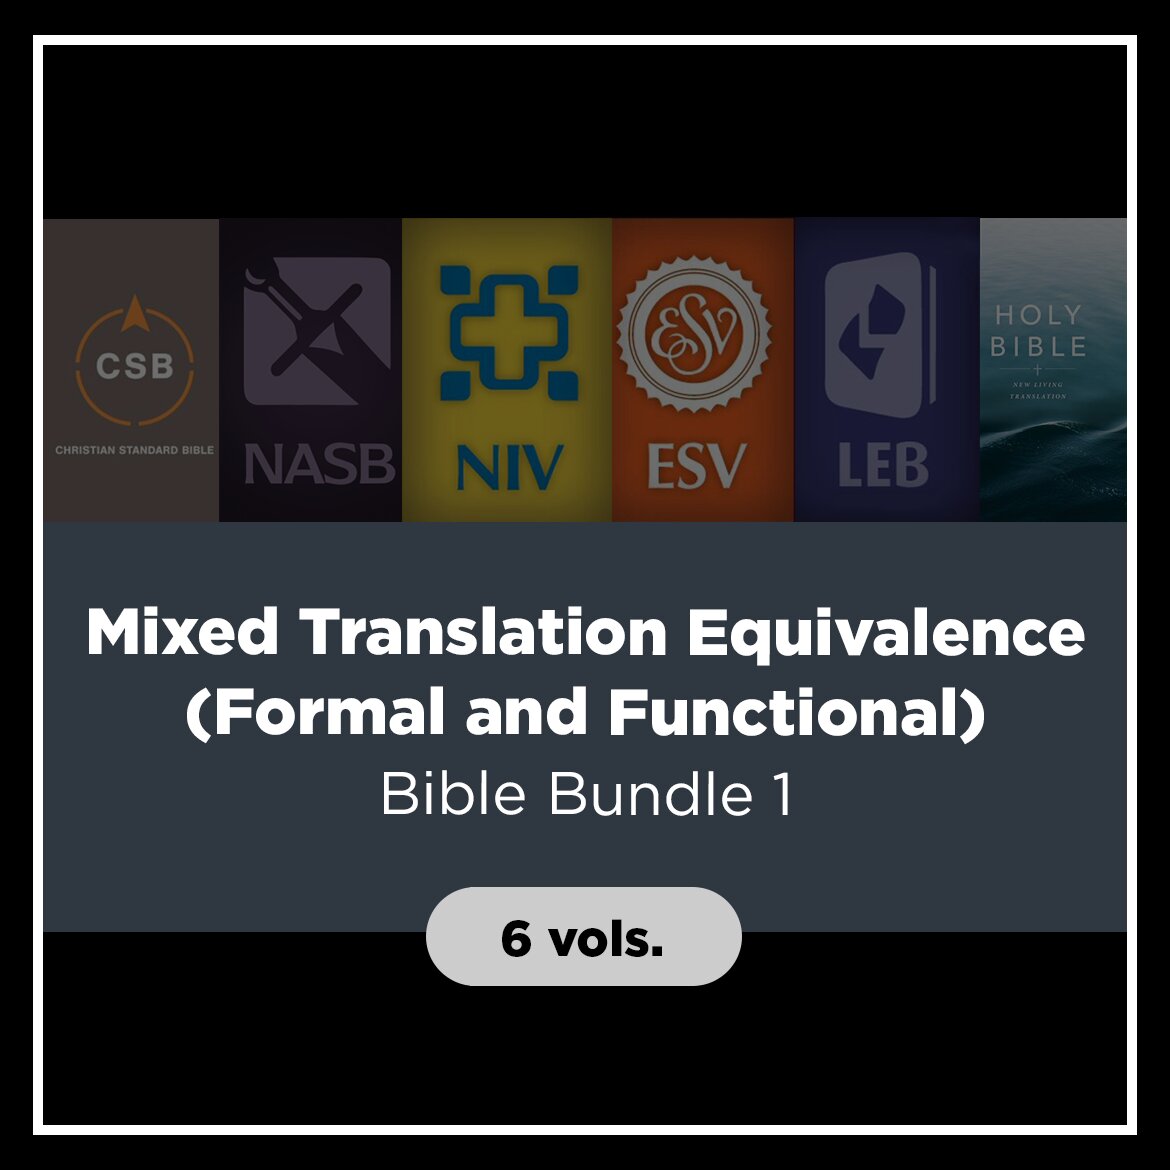 Mixed Translation Equivalence (Formal and Functional) Bible Bundle 1, 6 vols.